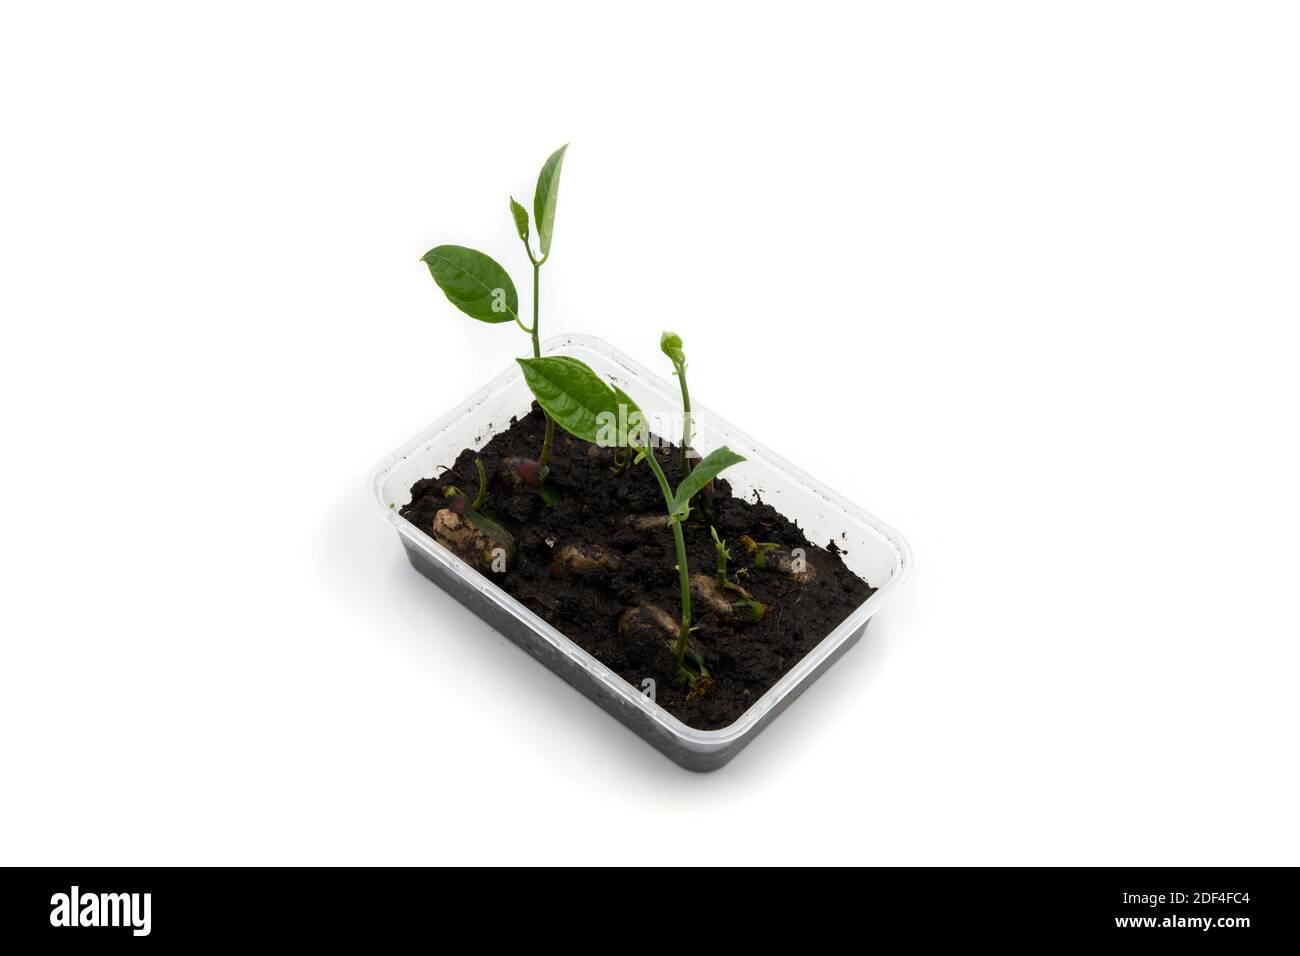 Green sapling from seed in plastic tray on white background. Growing plant from seed concept. Slow and steady development. Fresh green saplings in bla Stock Photo